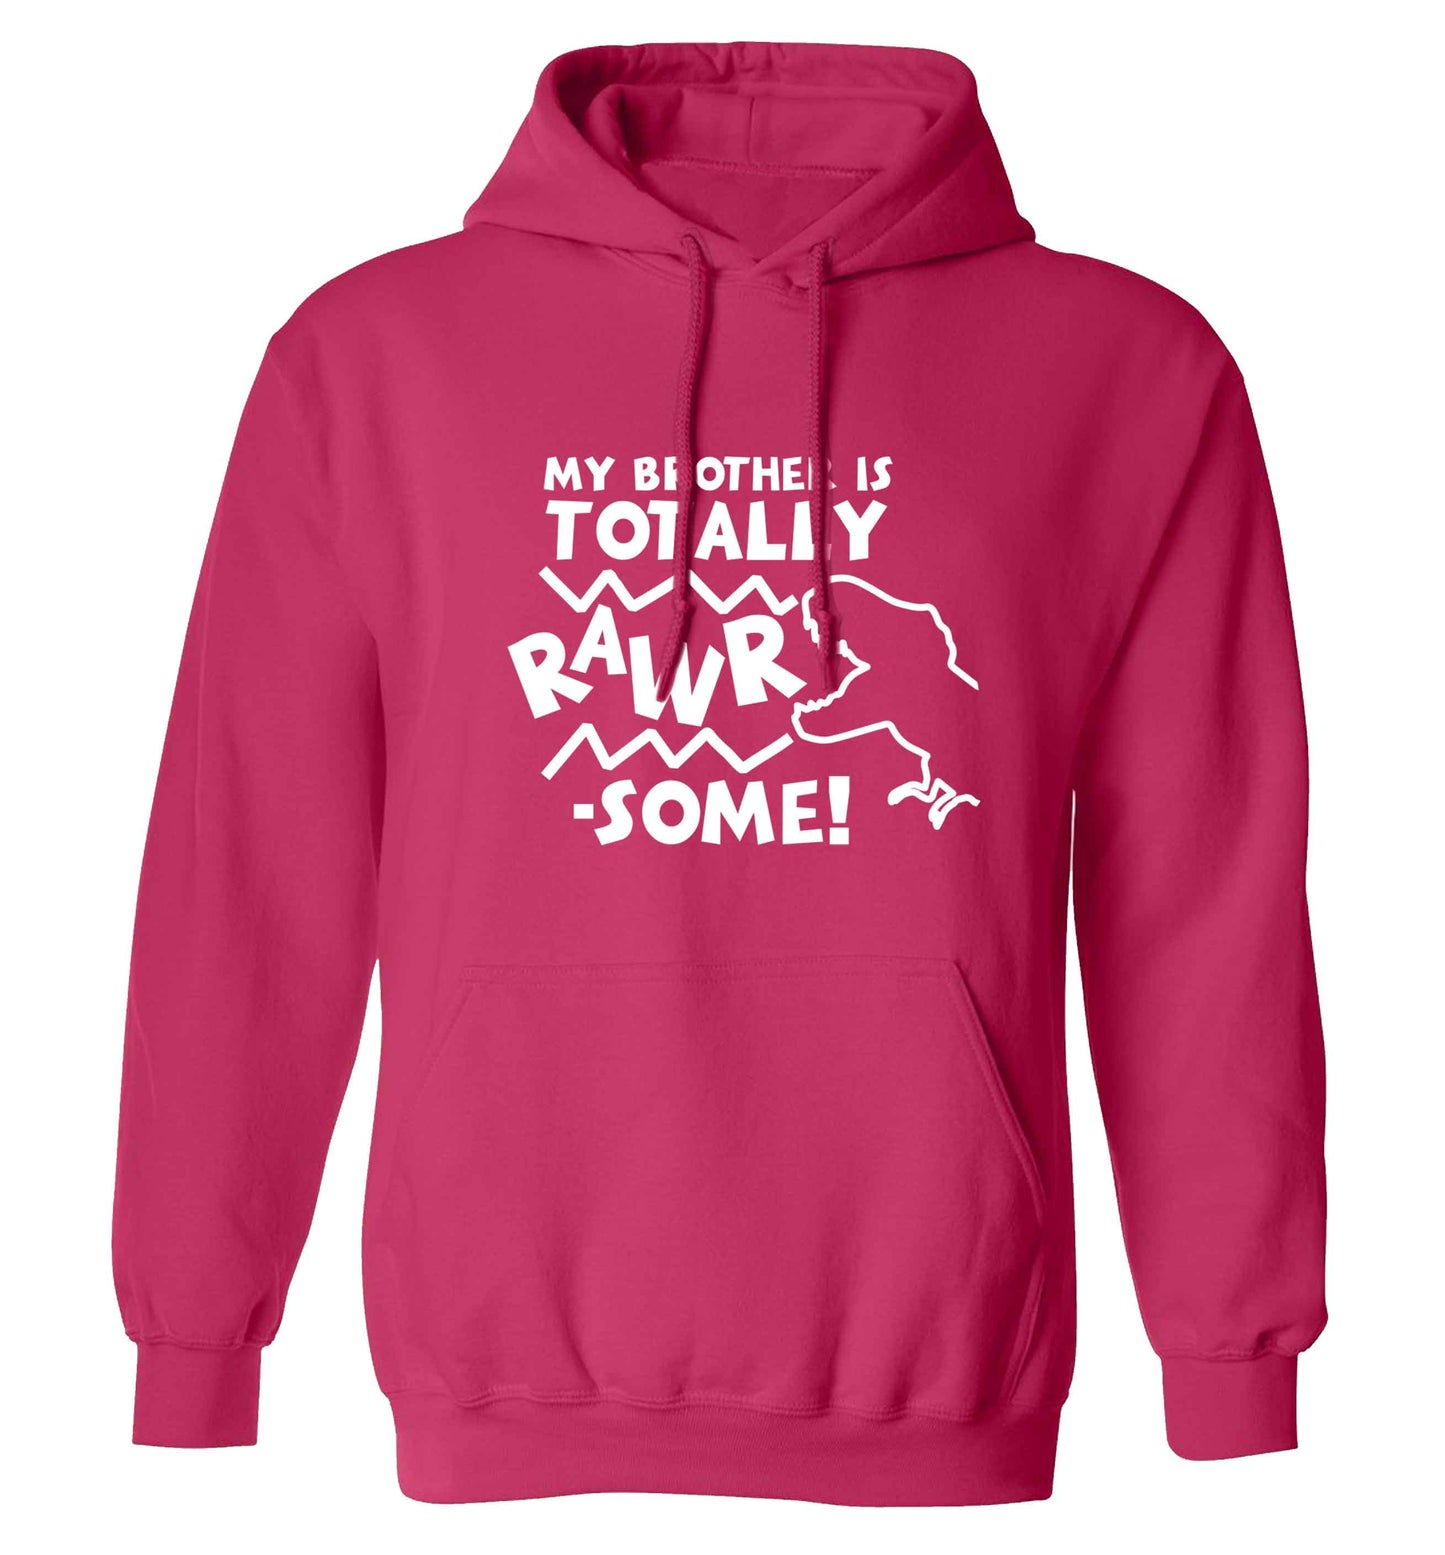 My brother is totally rawrsome adults unisex pink hoodie 2XL